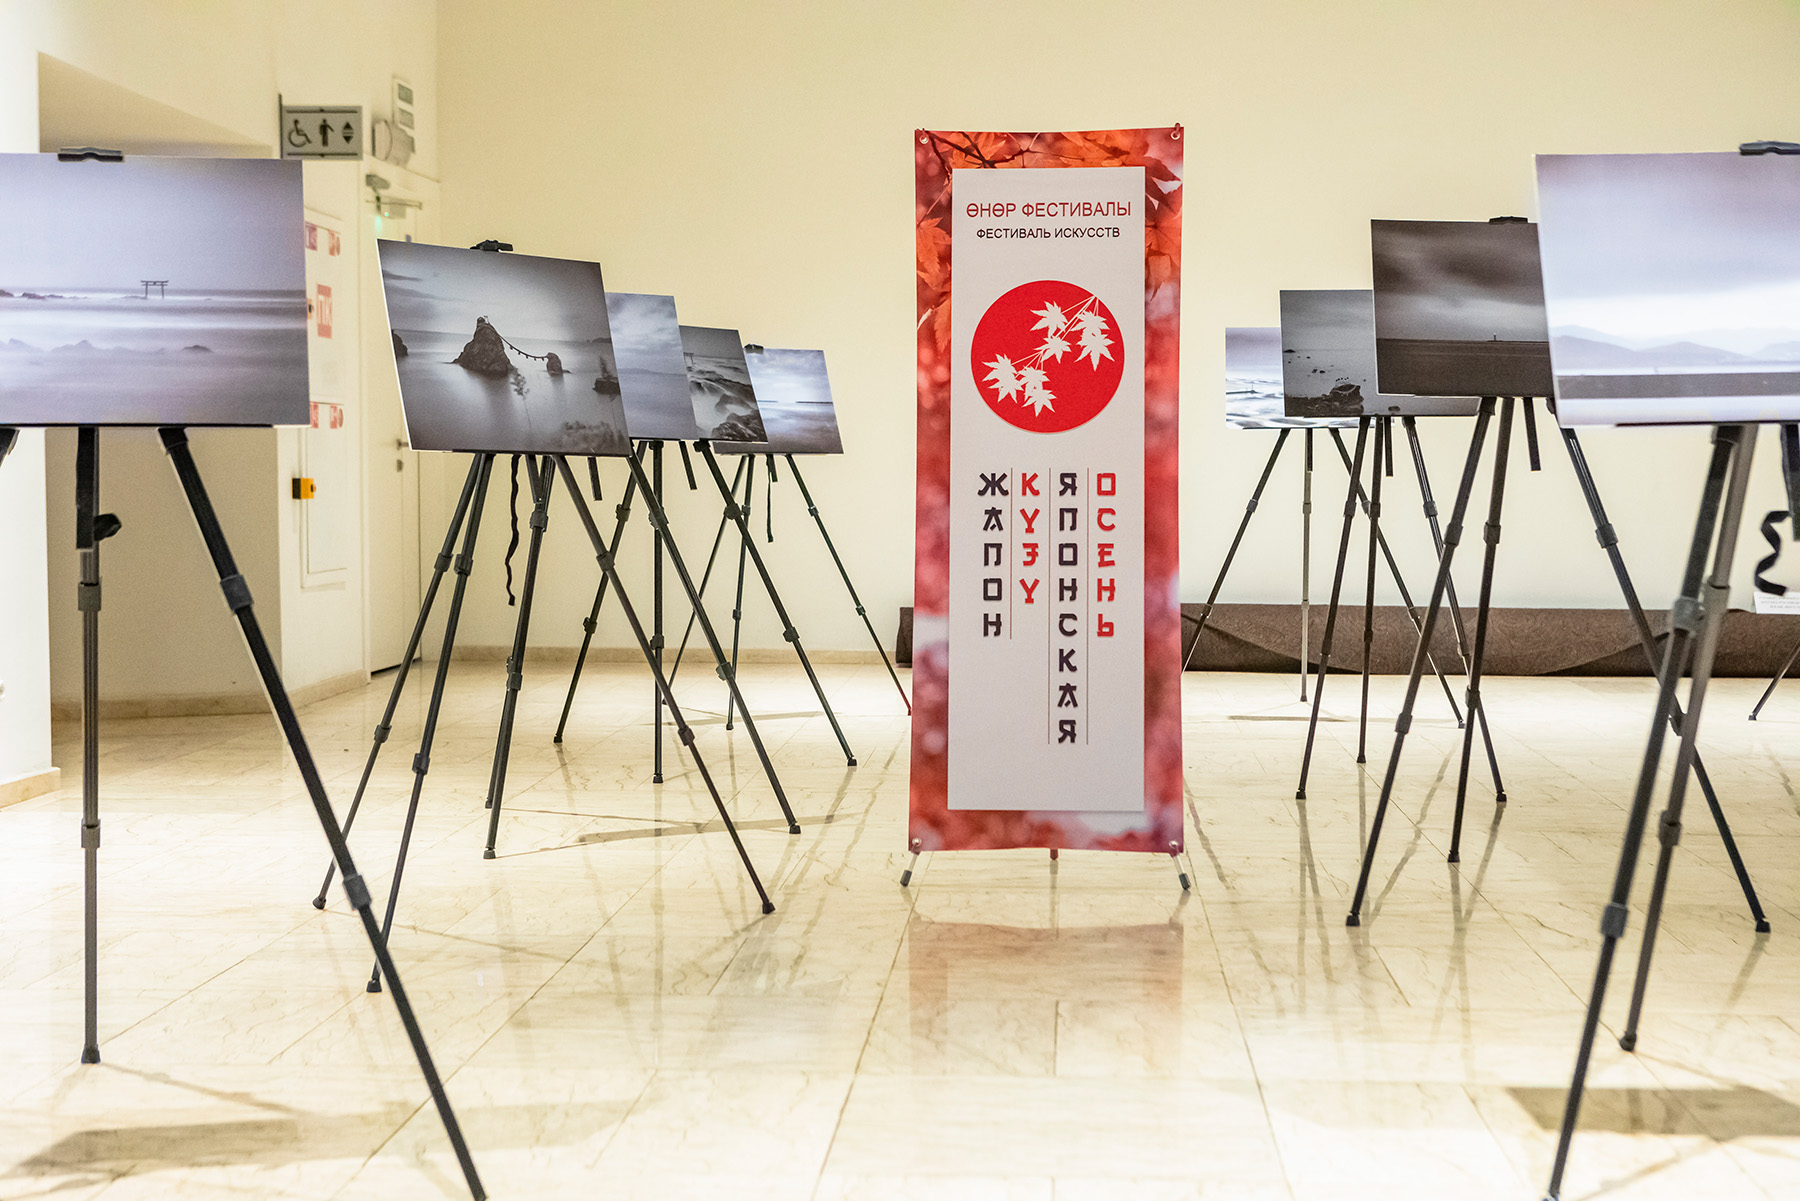 Yoshida held his solo exhibition and Kanie screened her documentary film at the Kyrgyzstan National Museum of History.